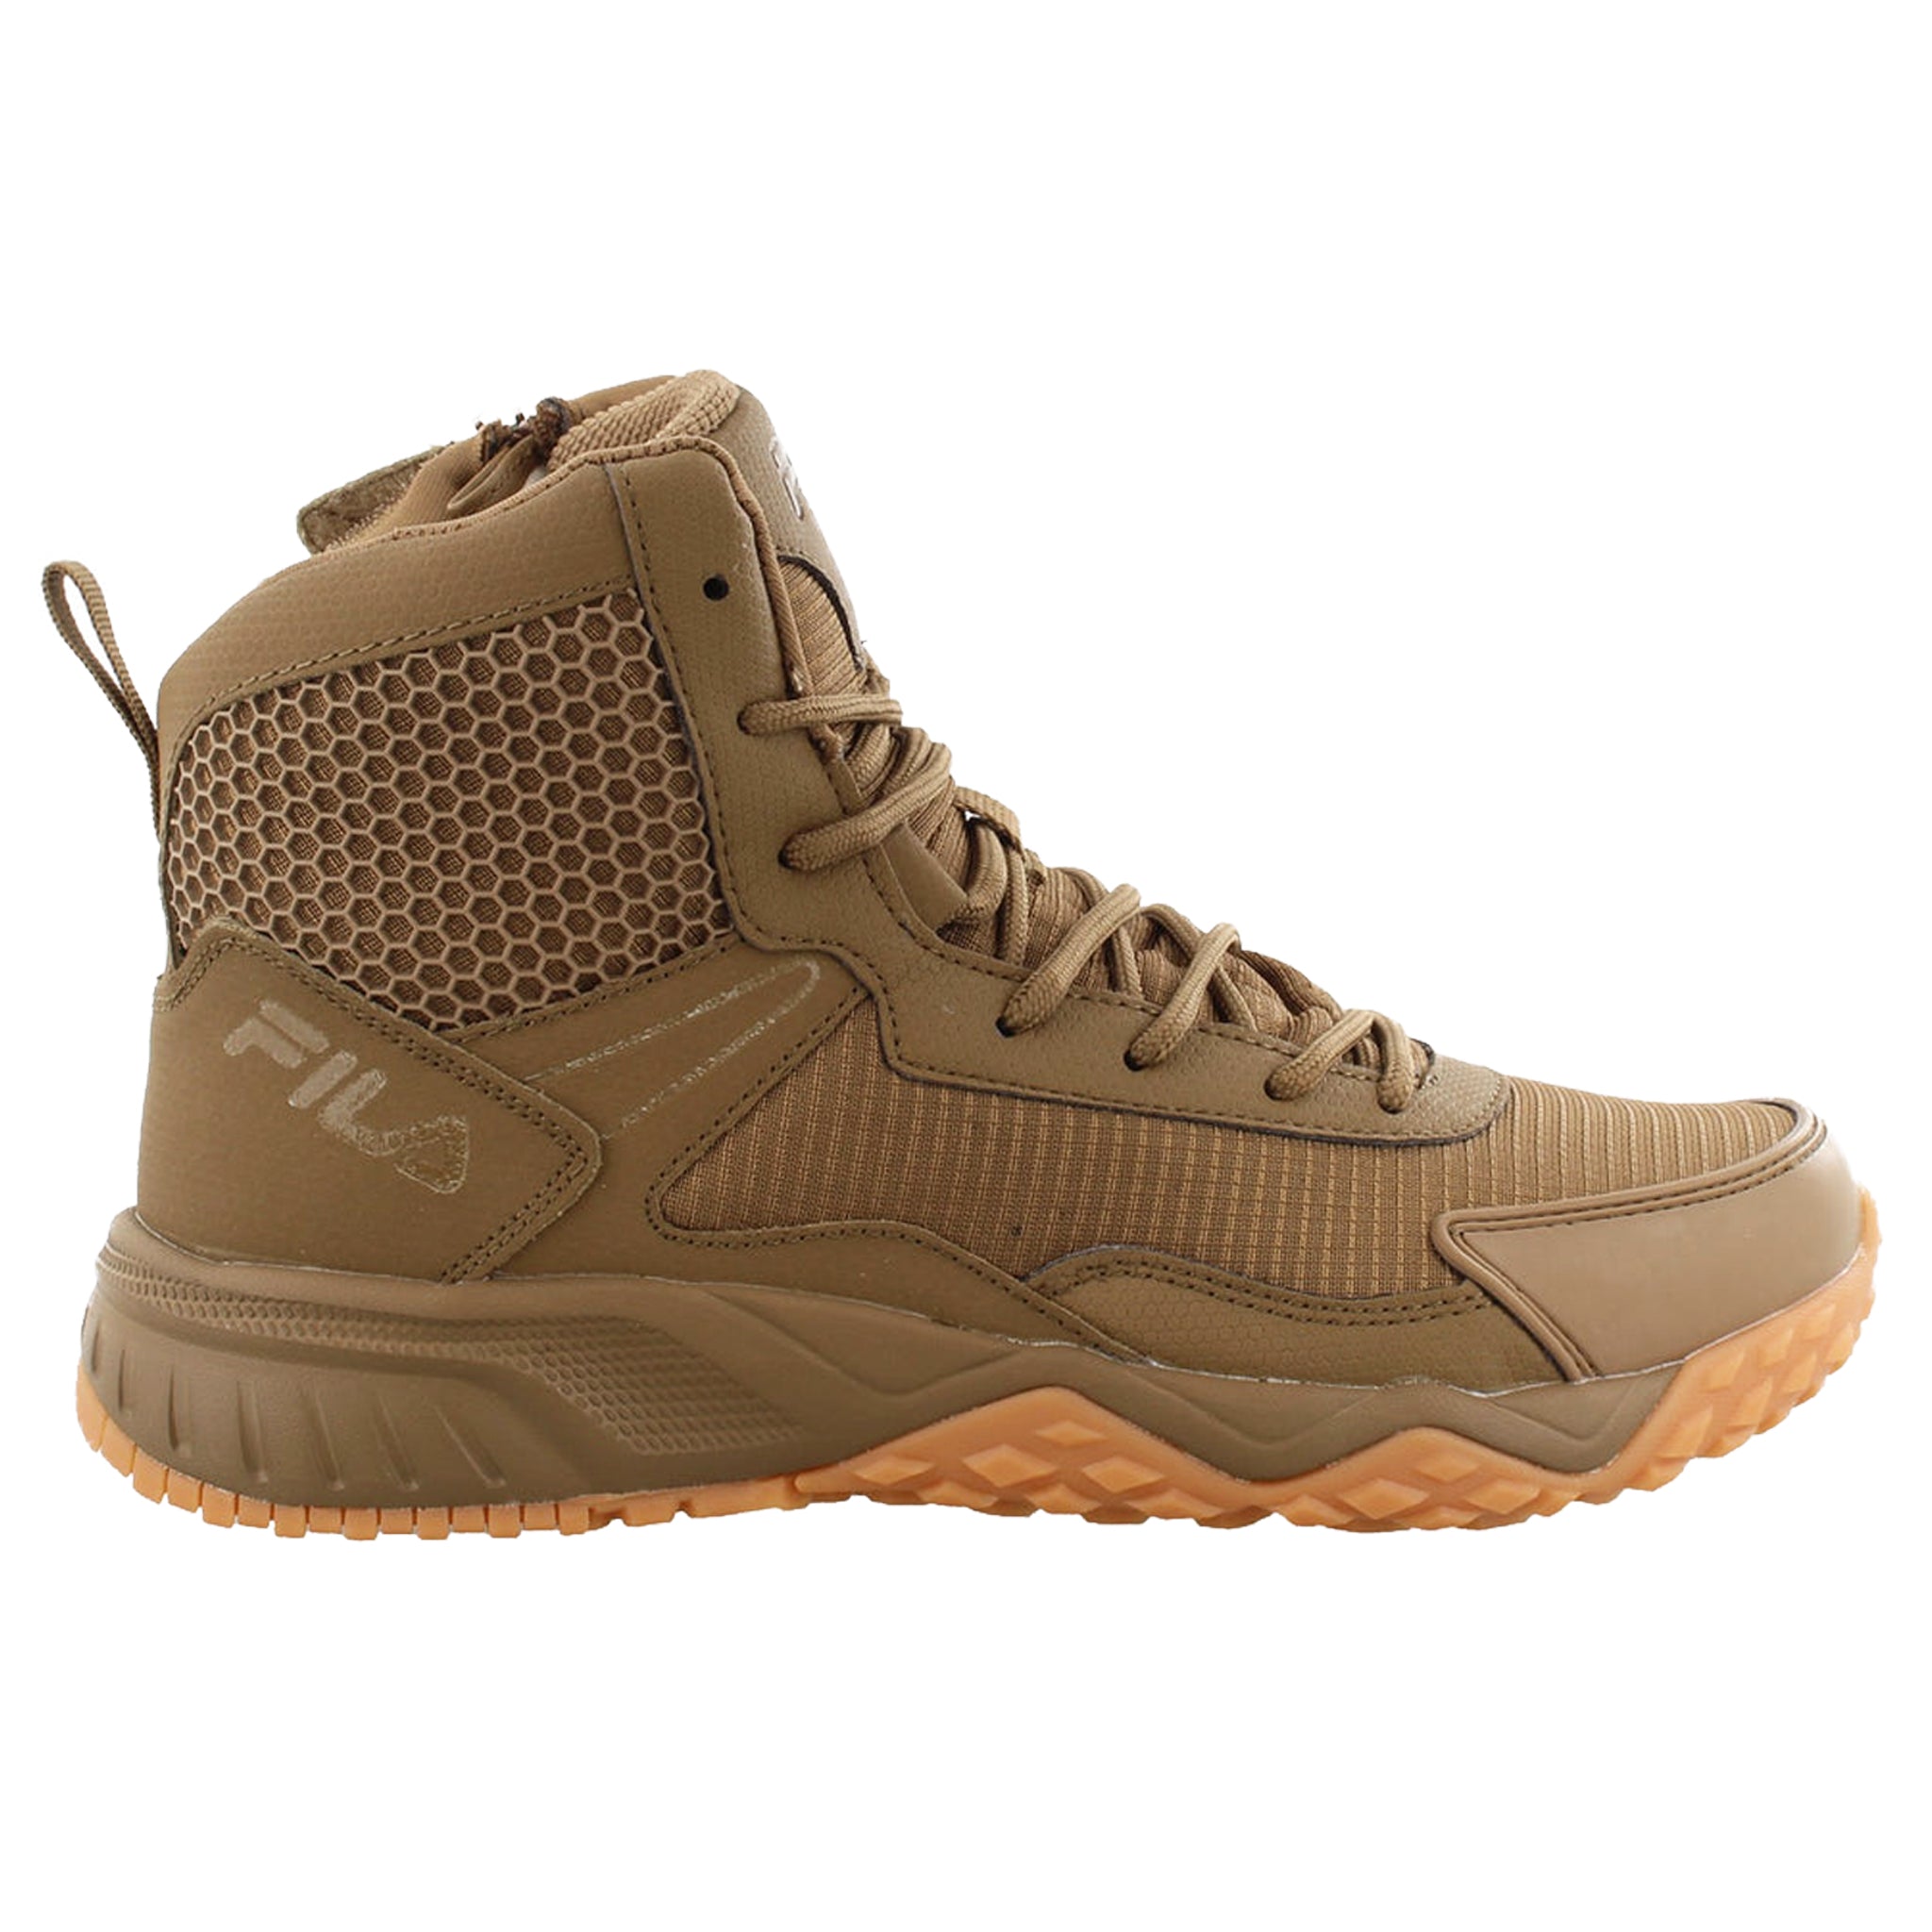 Fila Men's Chastizer Tactical Style Work Boots – That Shoe and More